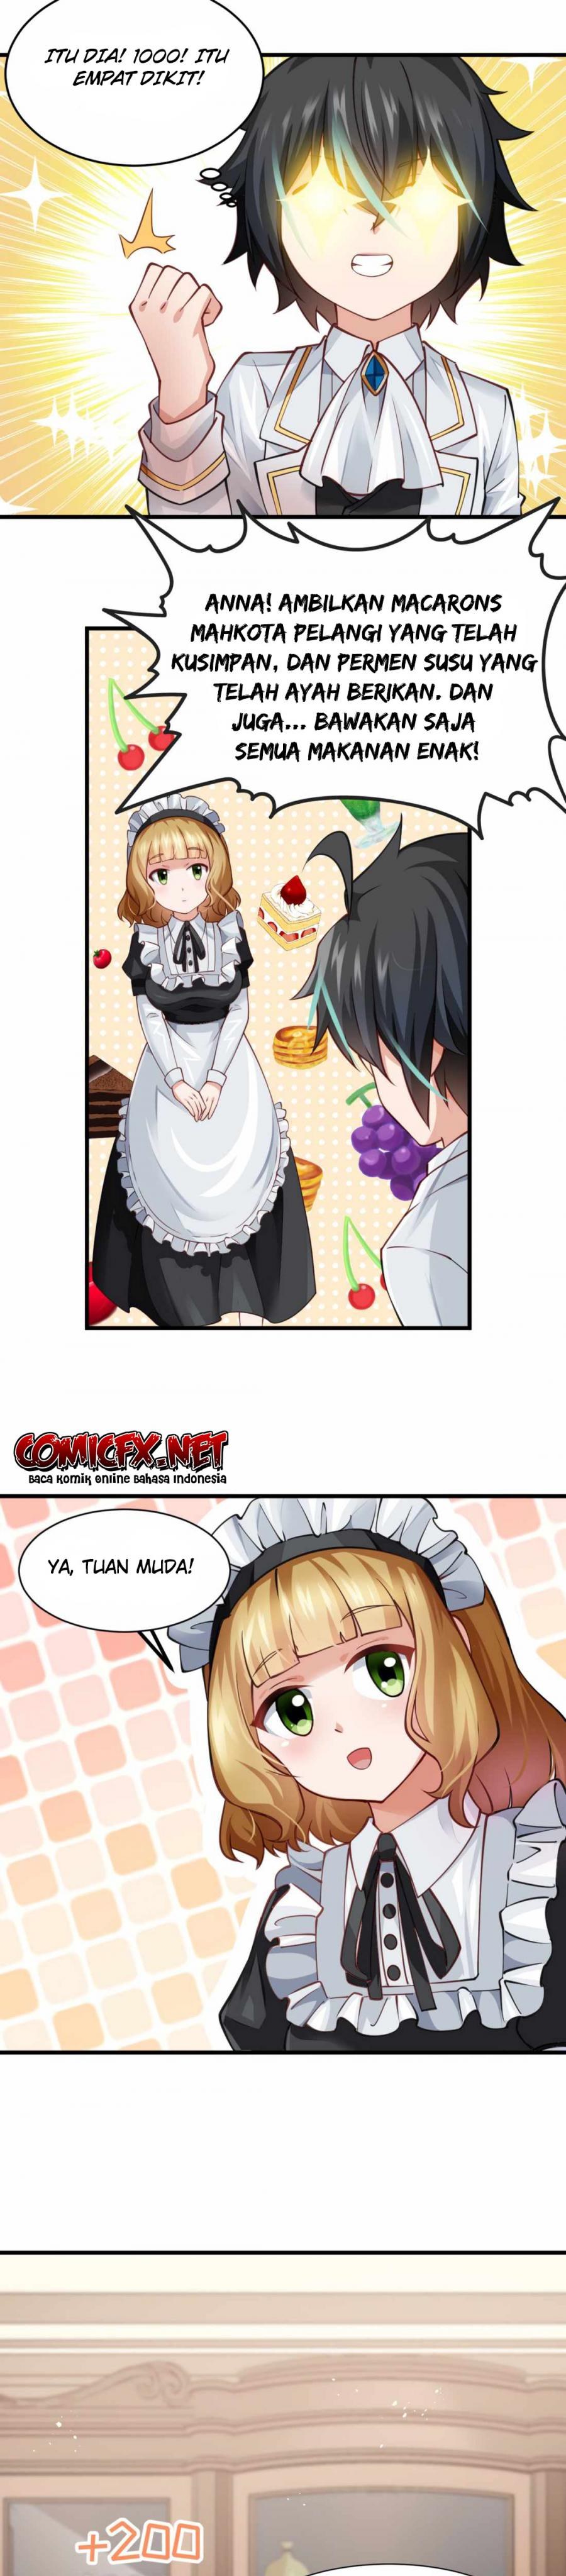 Dilarang COPAS - situs resmi www.mangacanblog.com - Komik little tyrant doesnt want to meet with a bad end 002 - chapter 2 3 Indonesia little tyrant doesnt want to meet with a bad end 002 - chapter 2 Terbaru 17|Baca Manga Komik Indonesia|Mangacan